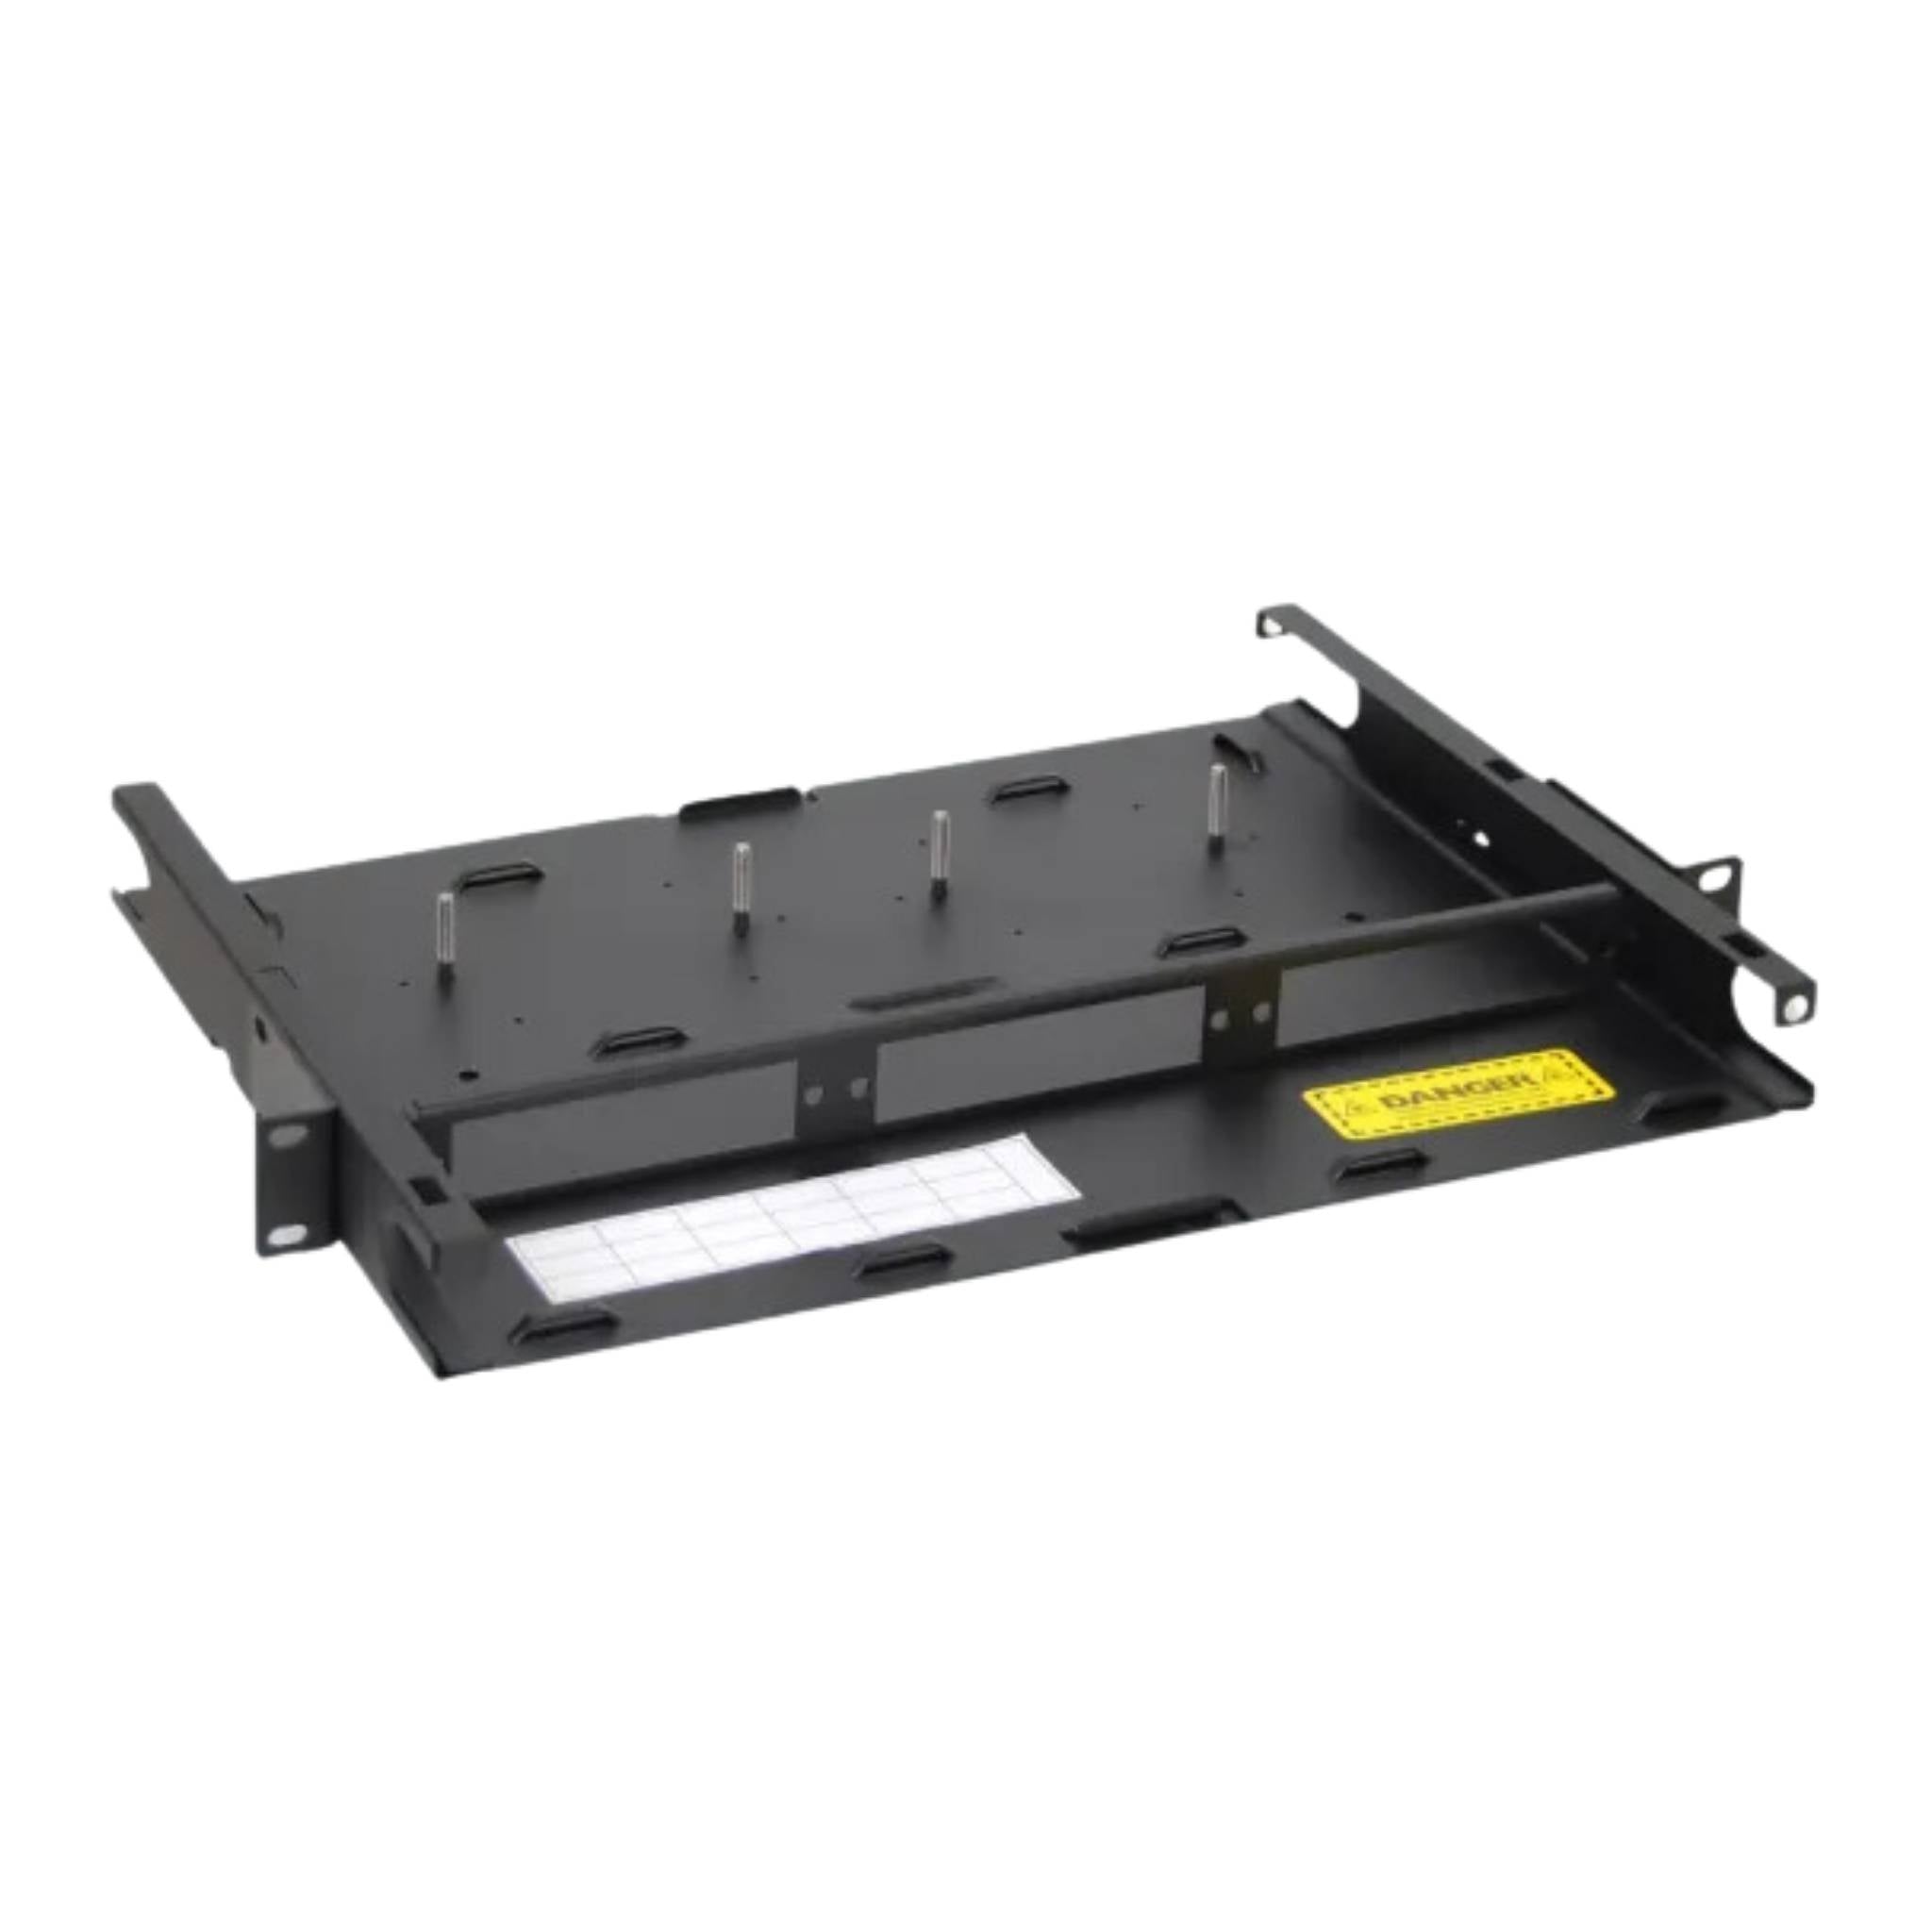 ICC Classic 1 RMS Fiber Optic Rack Mount Enclosure with 3 Slots for LGX Compatible Adapter Panels or Cassettes